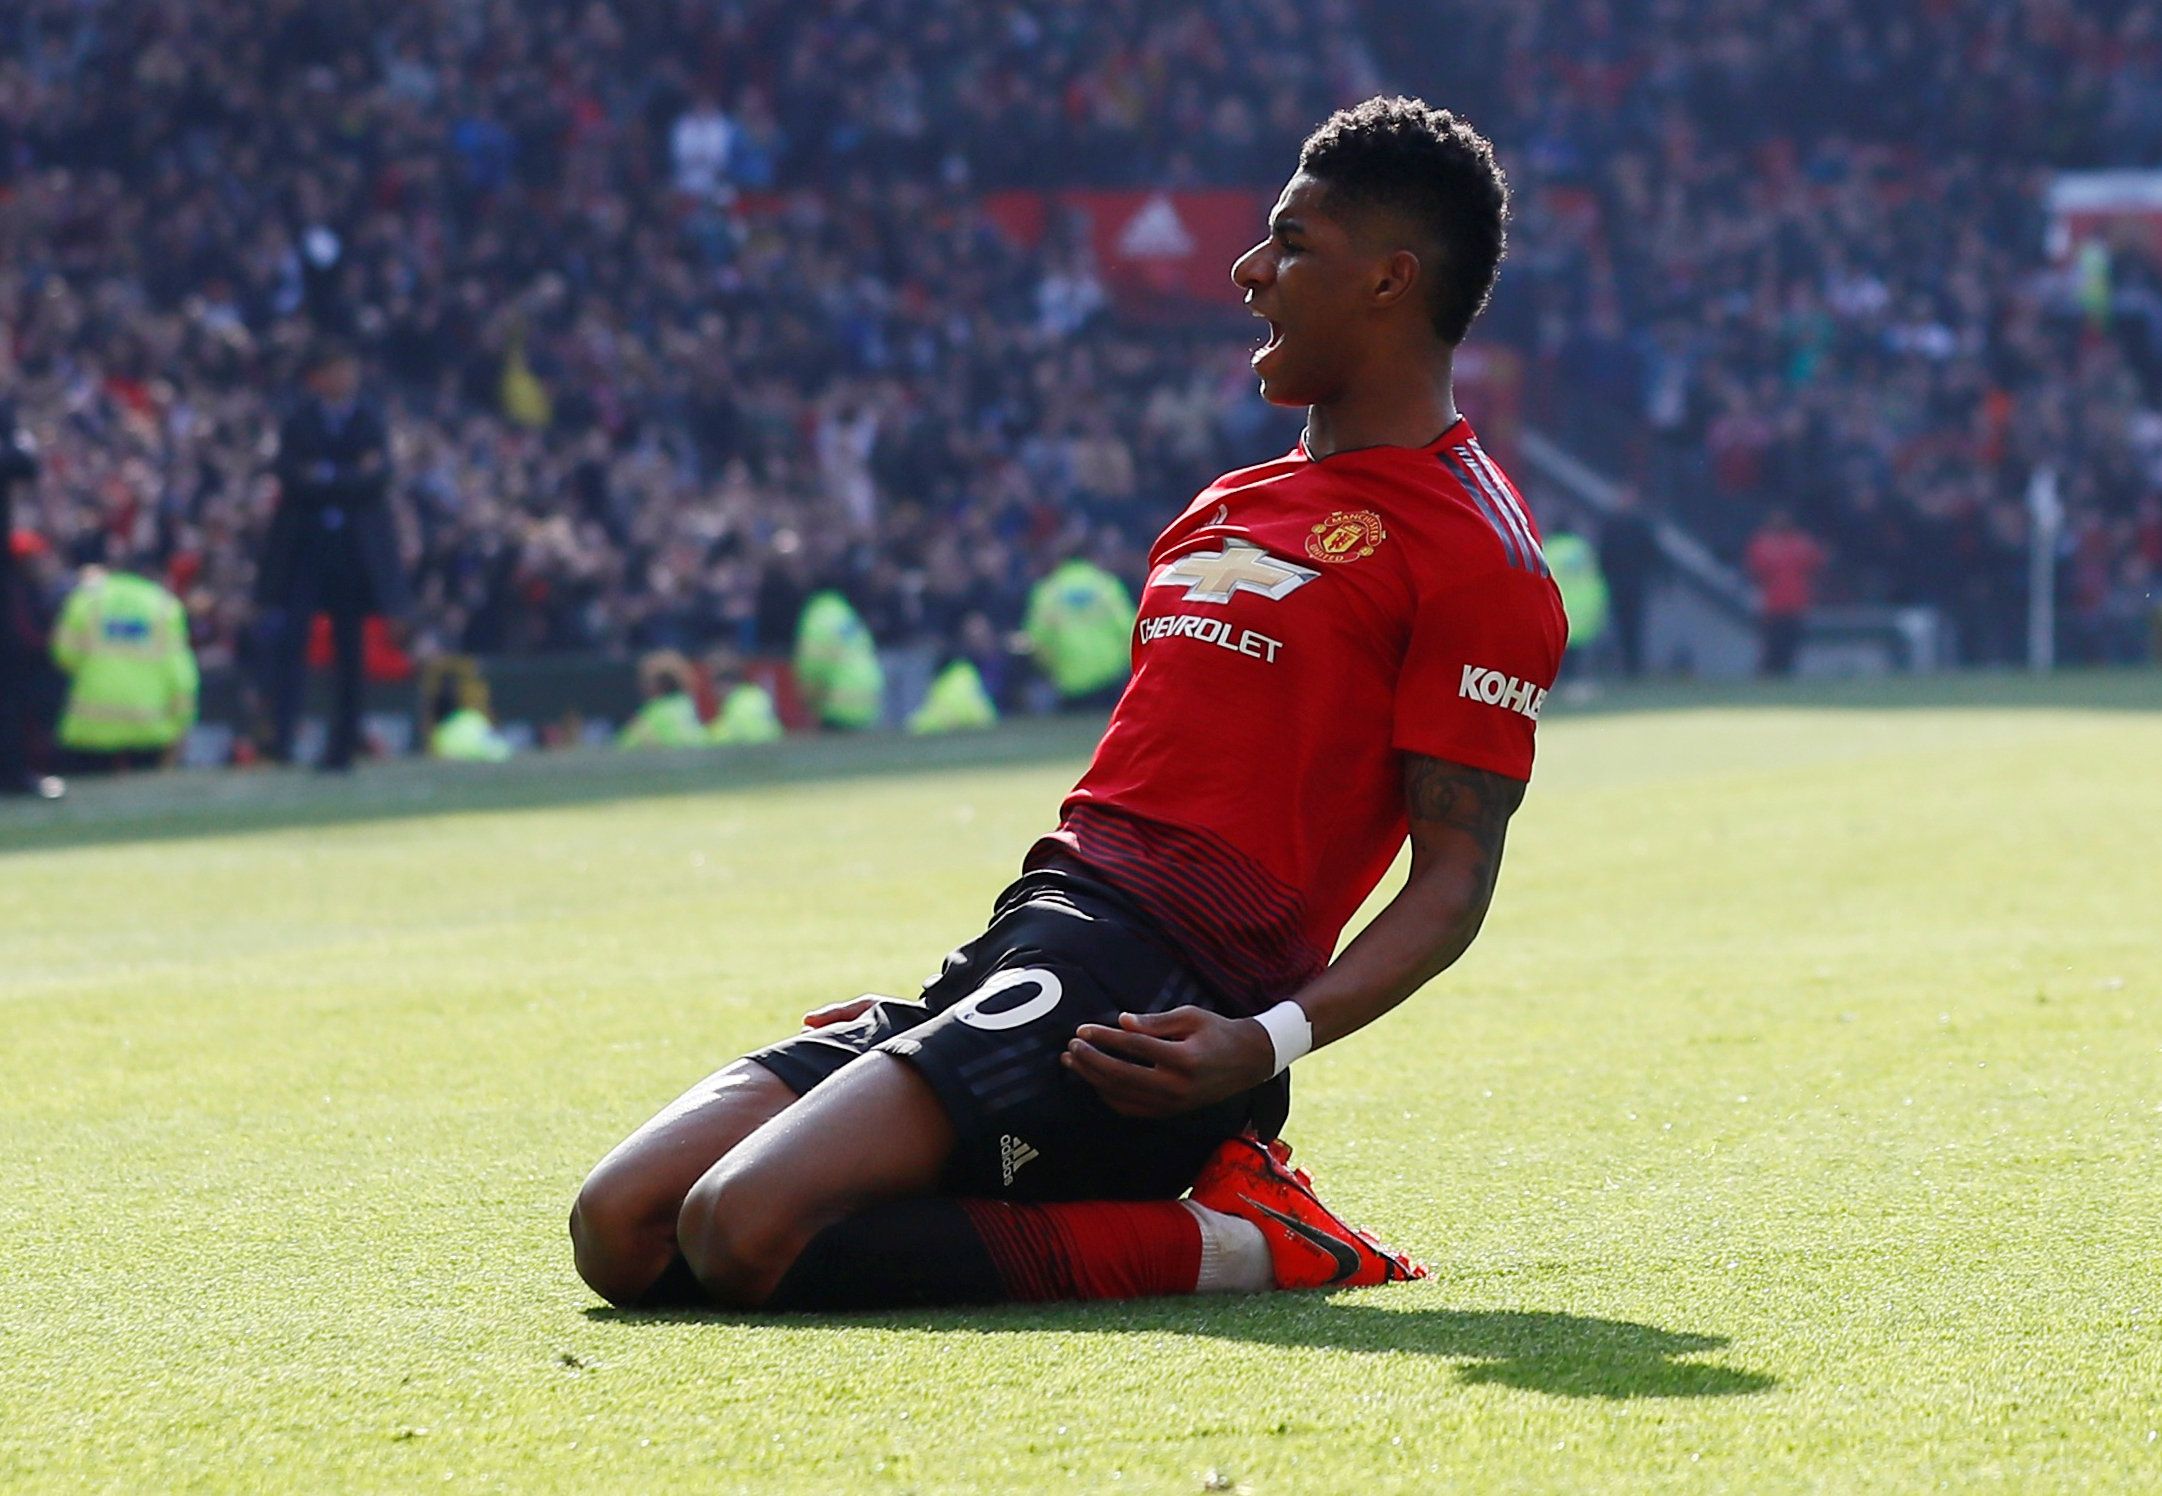 Soccer Football - Premier League - Manchester United v Watford - Old Trafford, Manchester, Britain - March 30, 2019  Manchester United's Marcus Rashford celebrates scoring their first goal            Action Images via Reuters/Jason Cairnduff  EDITORIAL USE ONLY. No use with unauthorized audio, video, data, fixture lists, club/league logos or 